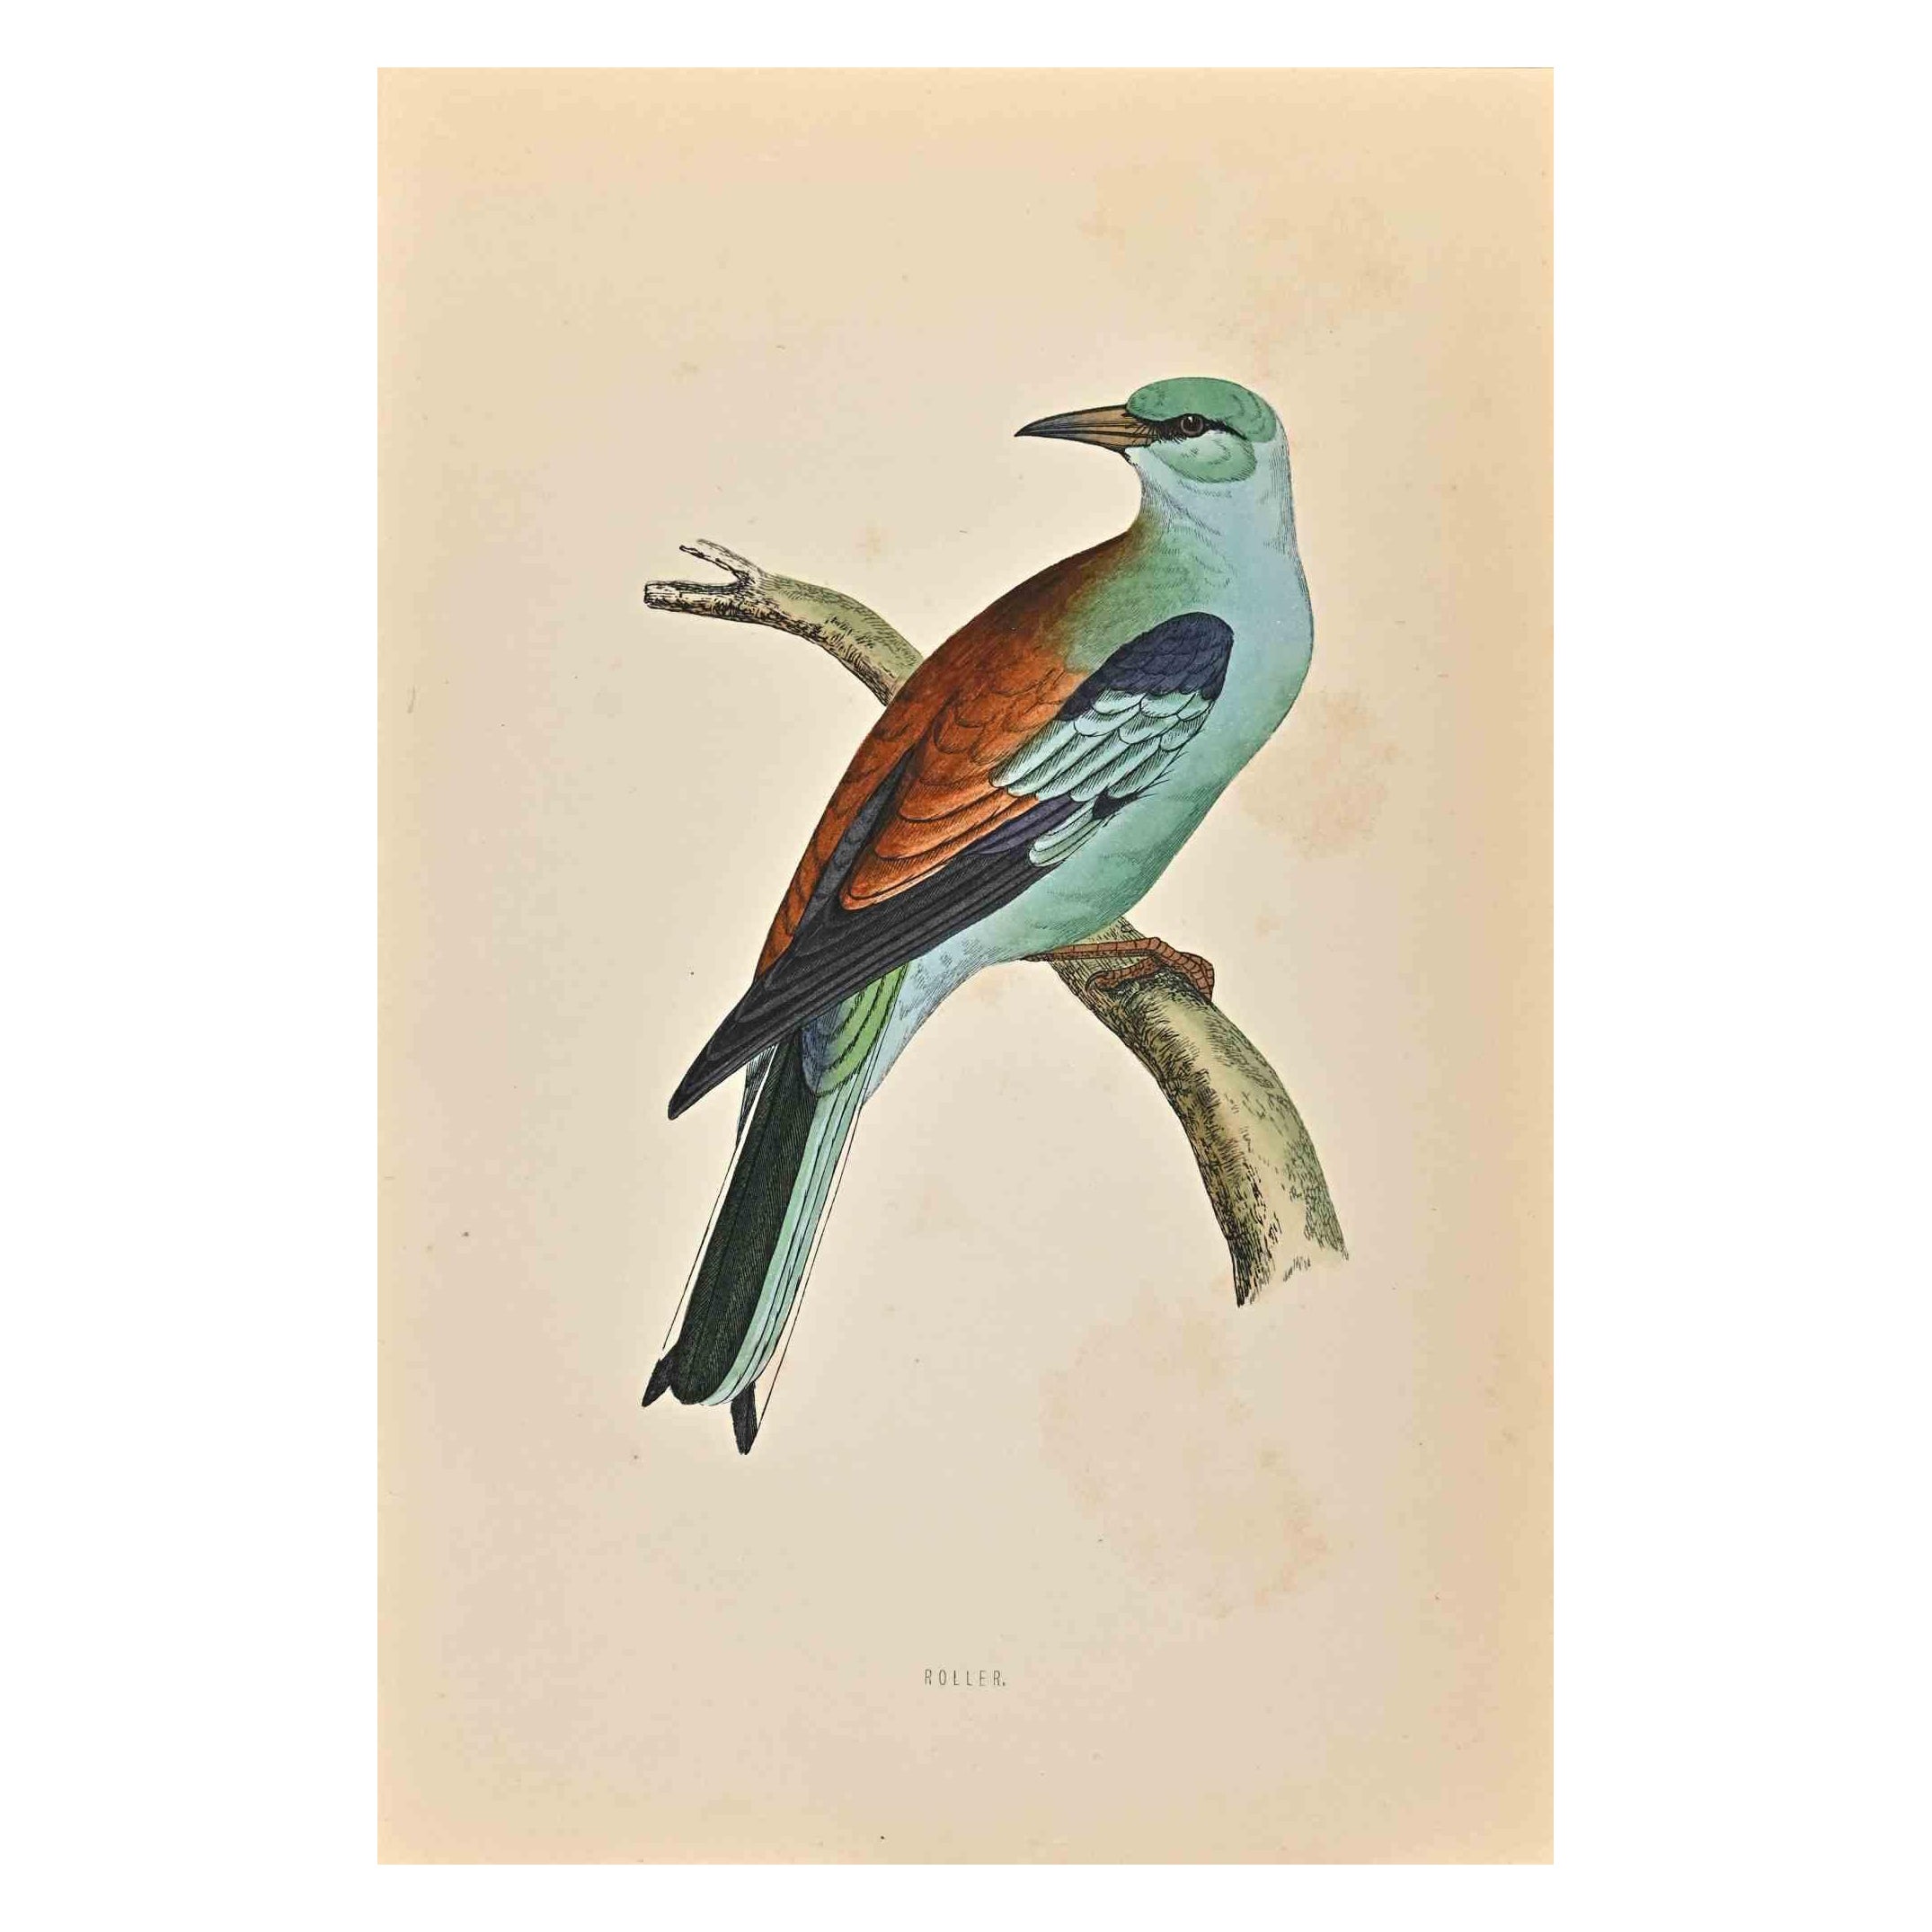 Roller is a modern artwork realized in 1870 by the British artist Alexander Francis Lydon (1836-1917).

Woodcut print on ivory-colored paper.

Hand-colored, published by London, Bell & Sons, 1870.  

The name of the bird is printed on the plate.